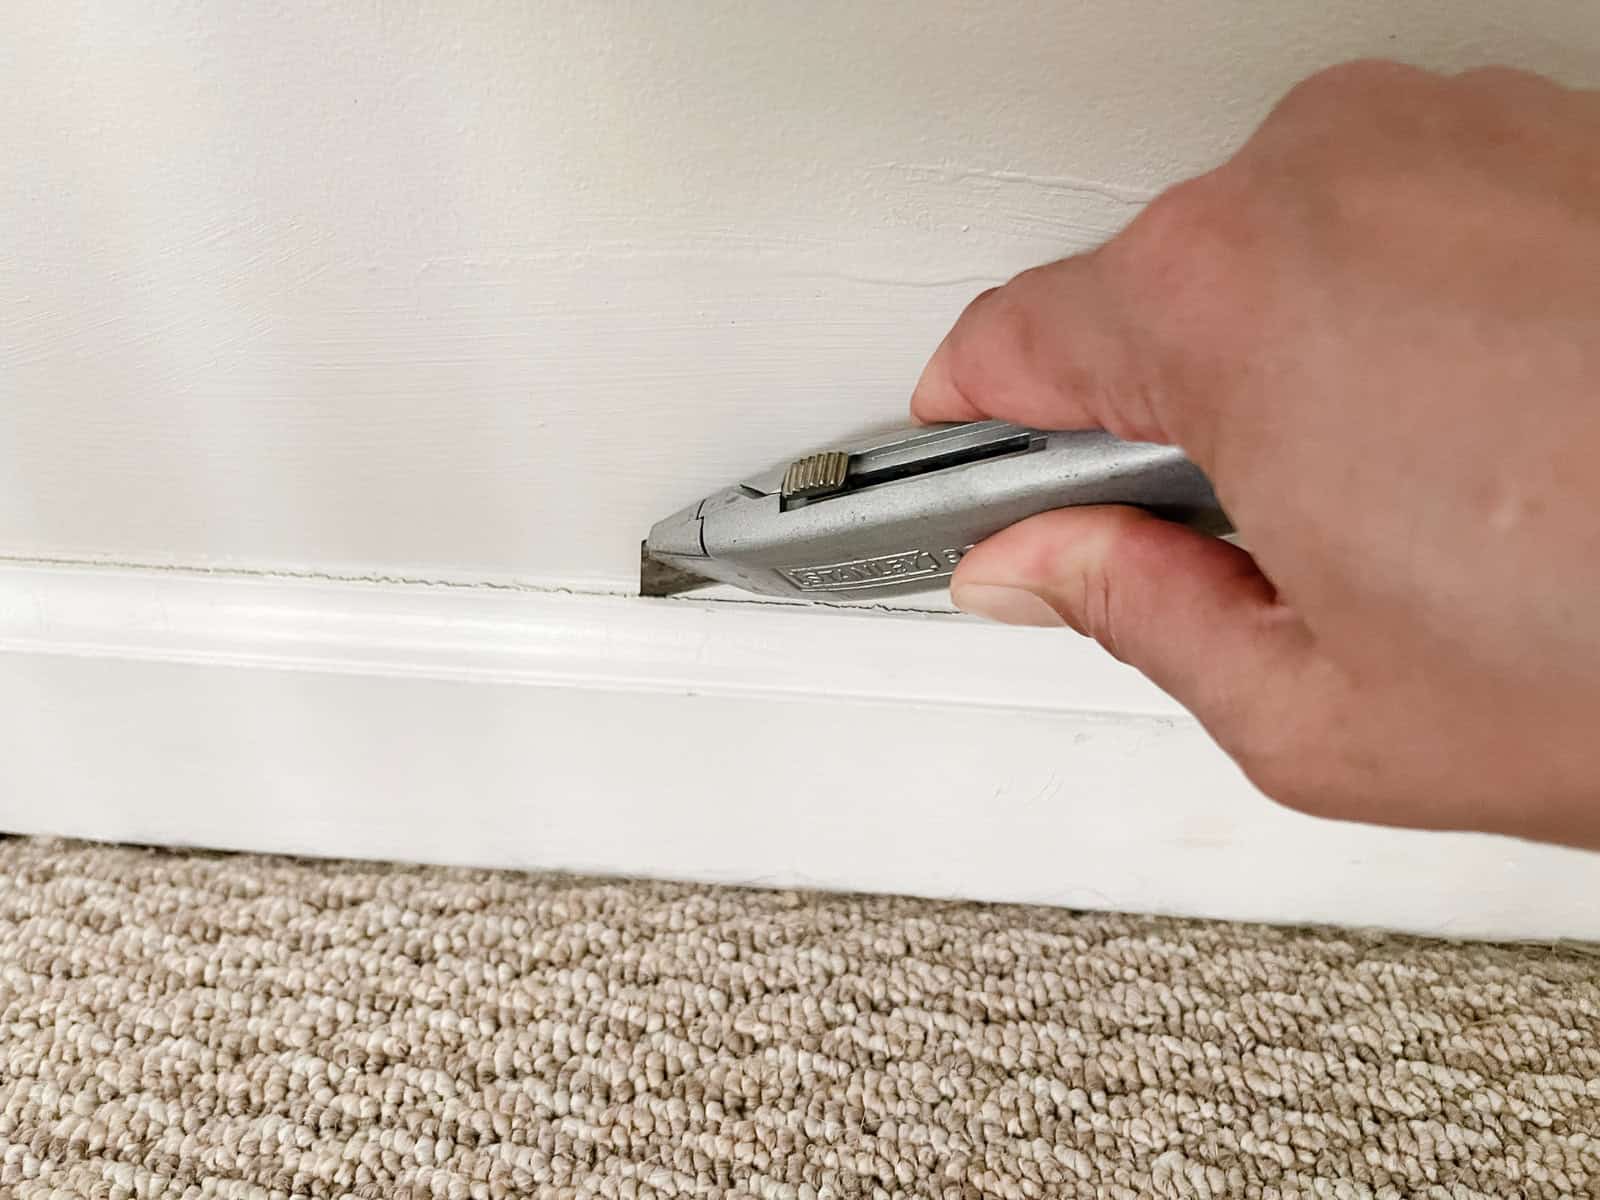 how to remove baseboards